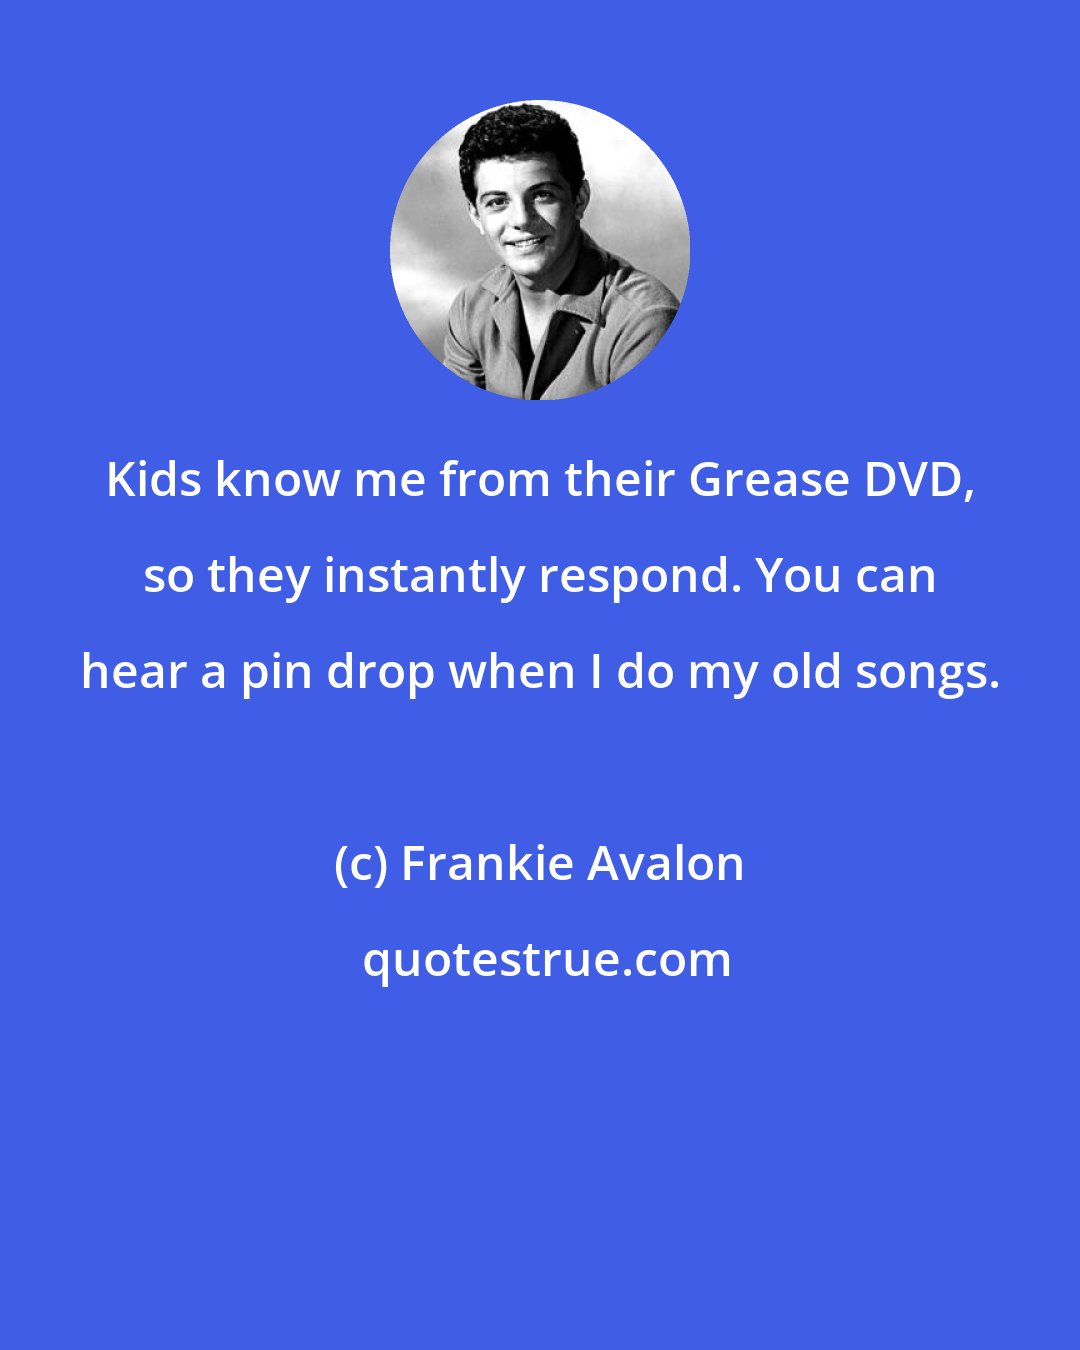 Frankie Avalon: Kids know me from their Grease DVD, so they instantly respond. You can hear a pin drop when I do my old songs.